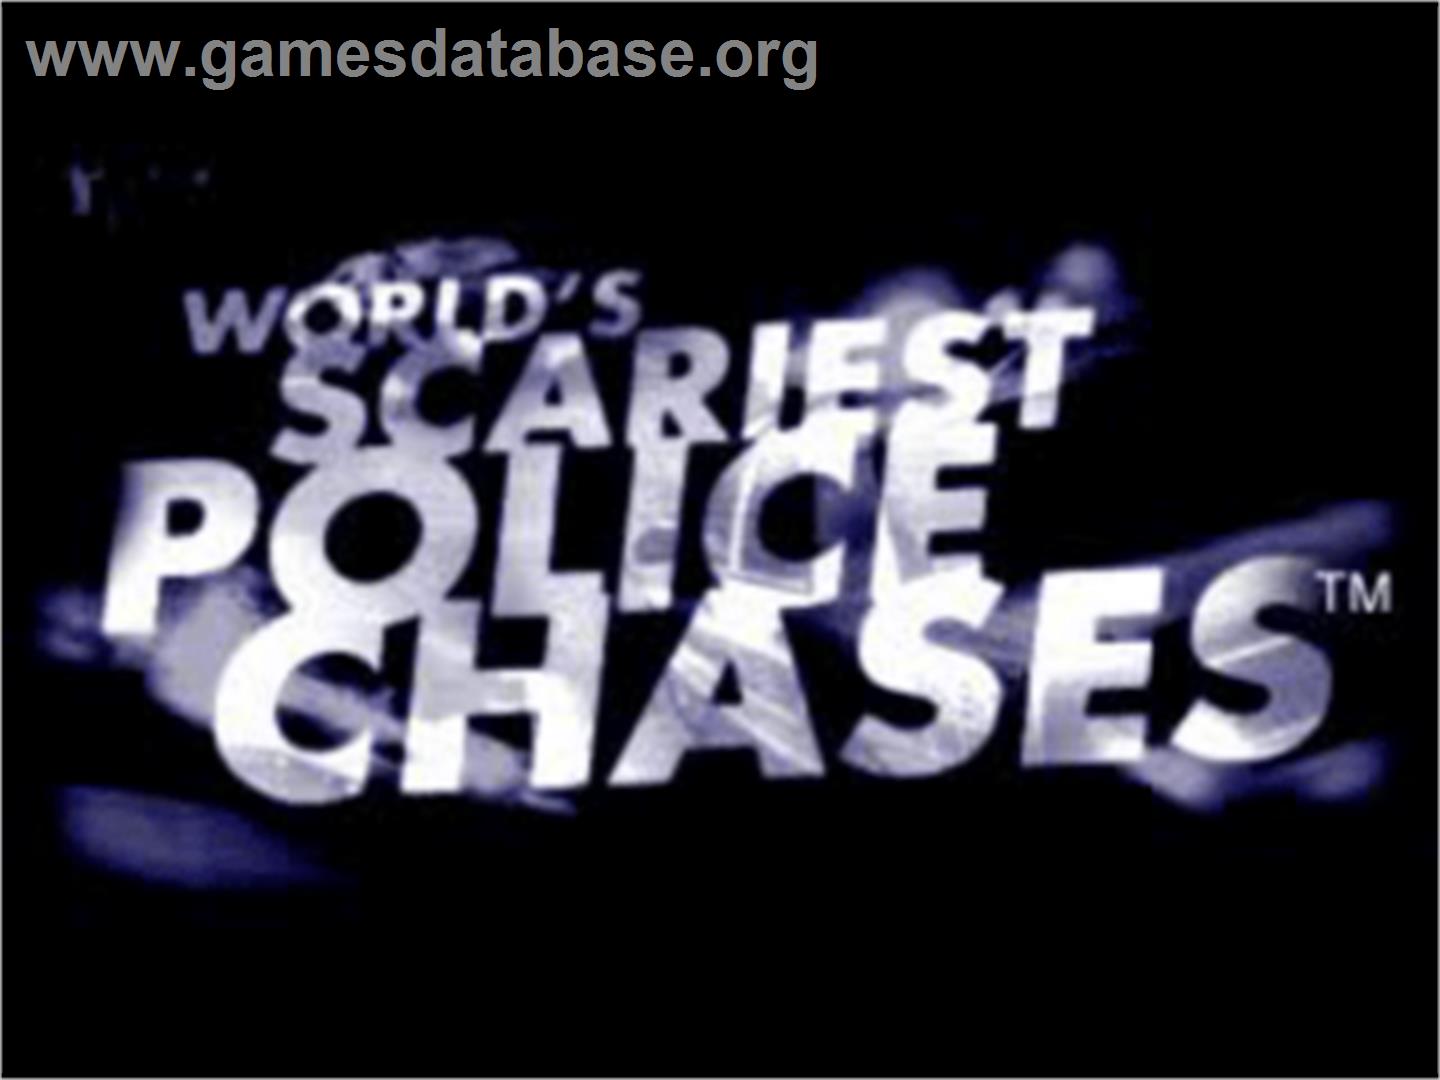 World's Scariest Police Chases - Sony Playstation - Artwork - Title Screen